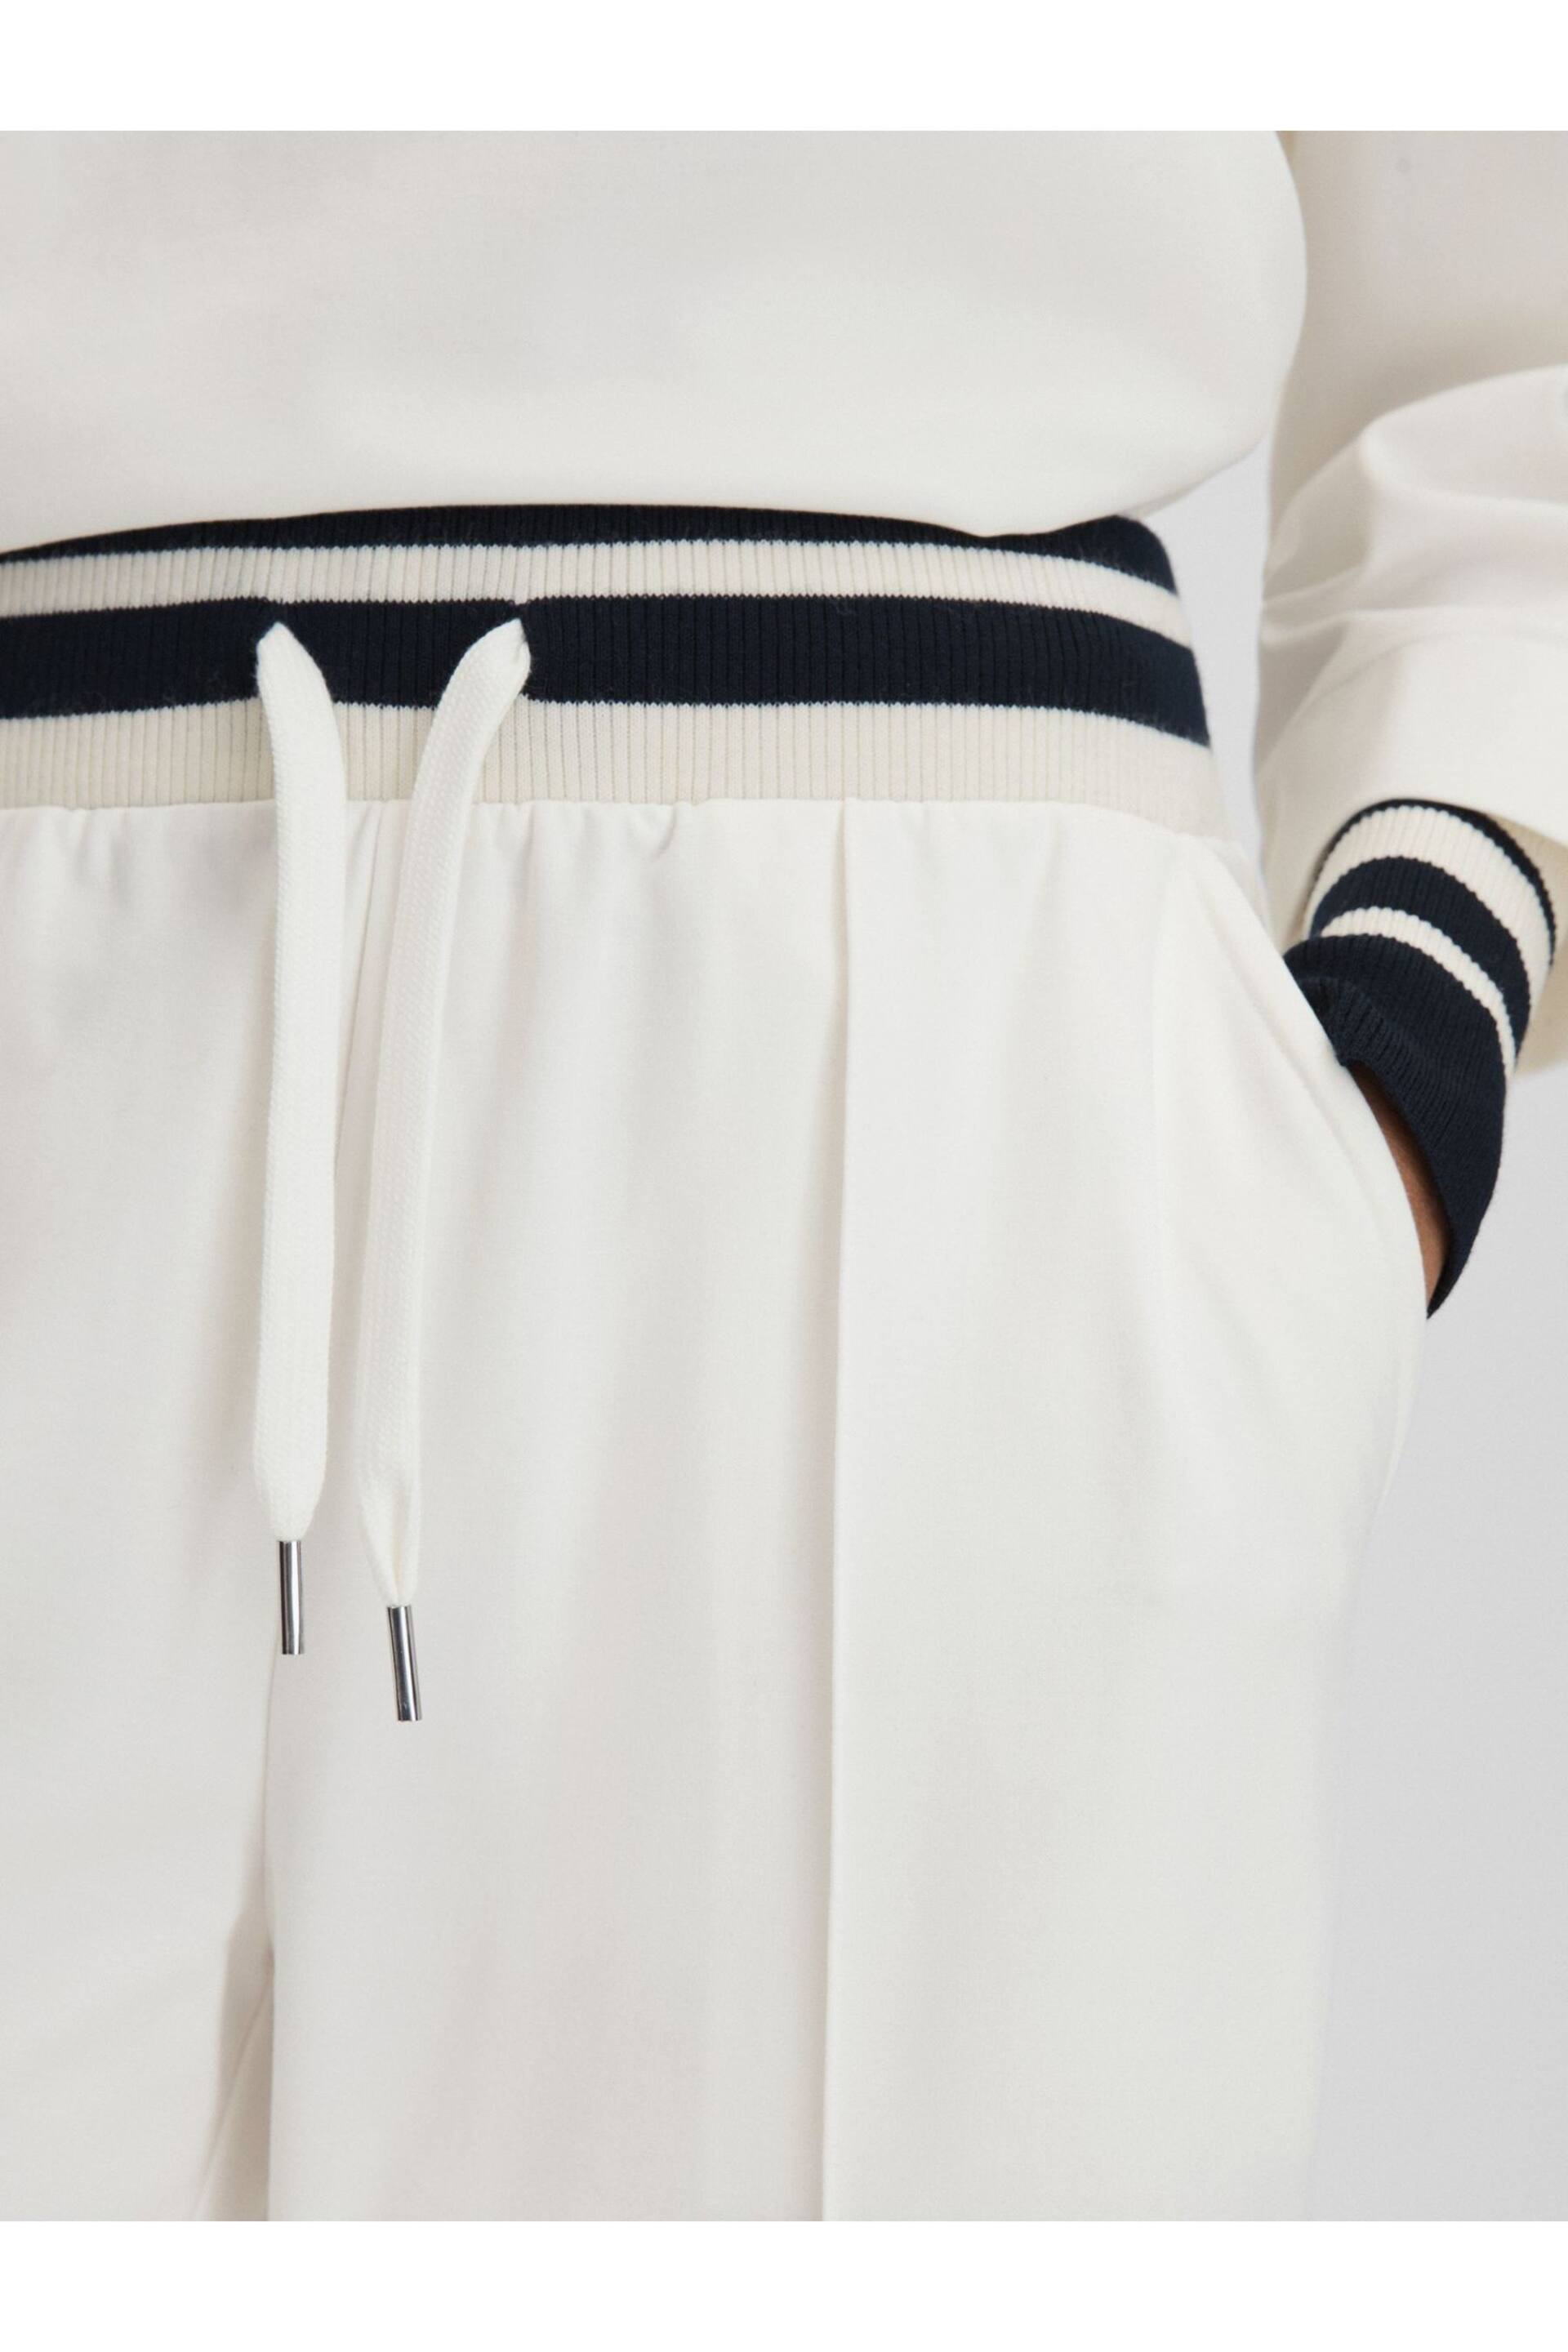 Reiss Navy/Ivory Lexi Striped Drawstring Waistband Joggers - Image 4 of 6